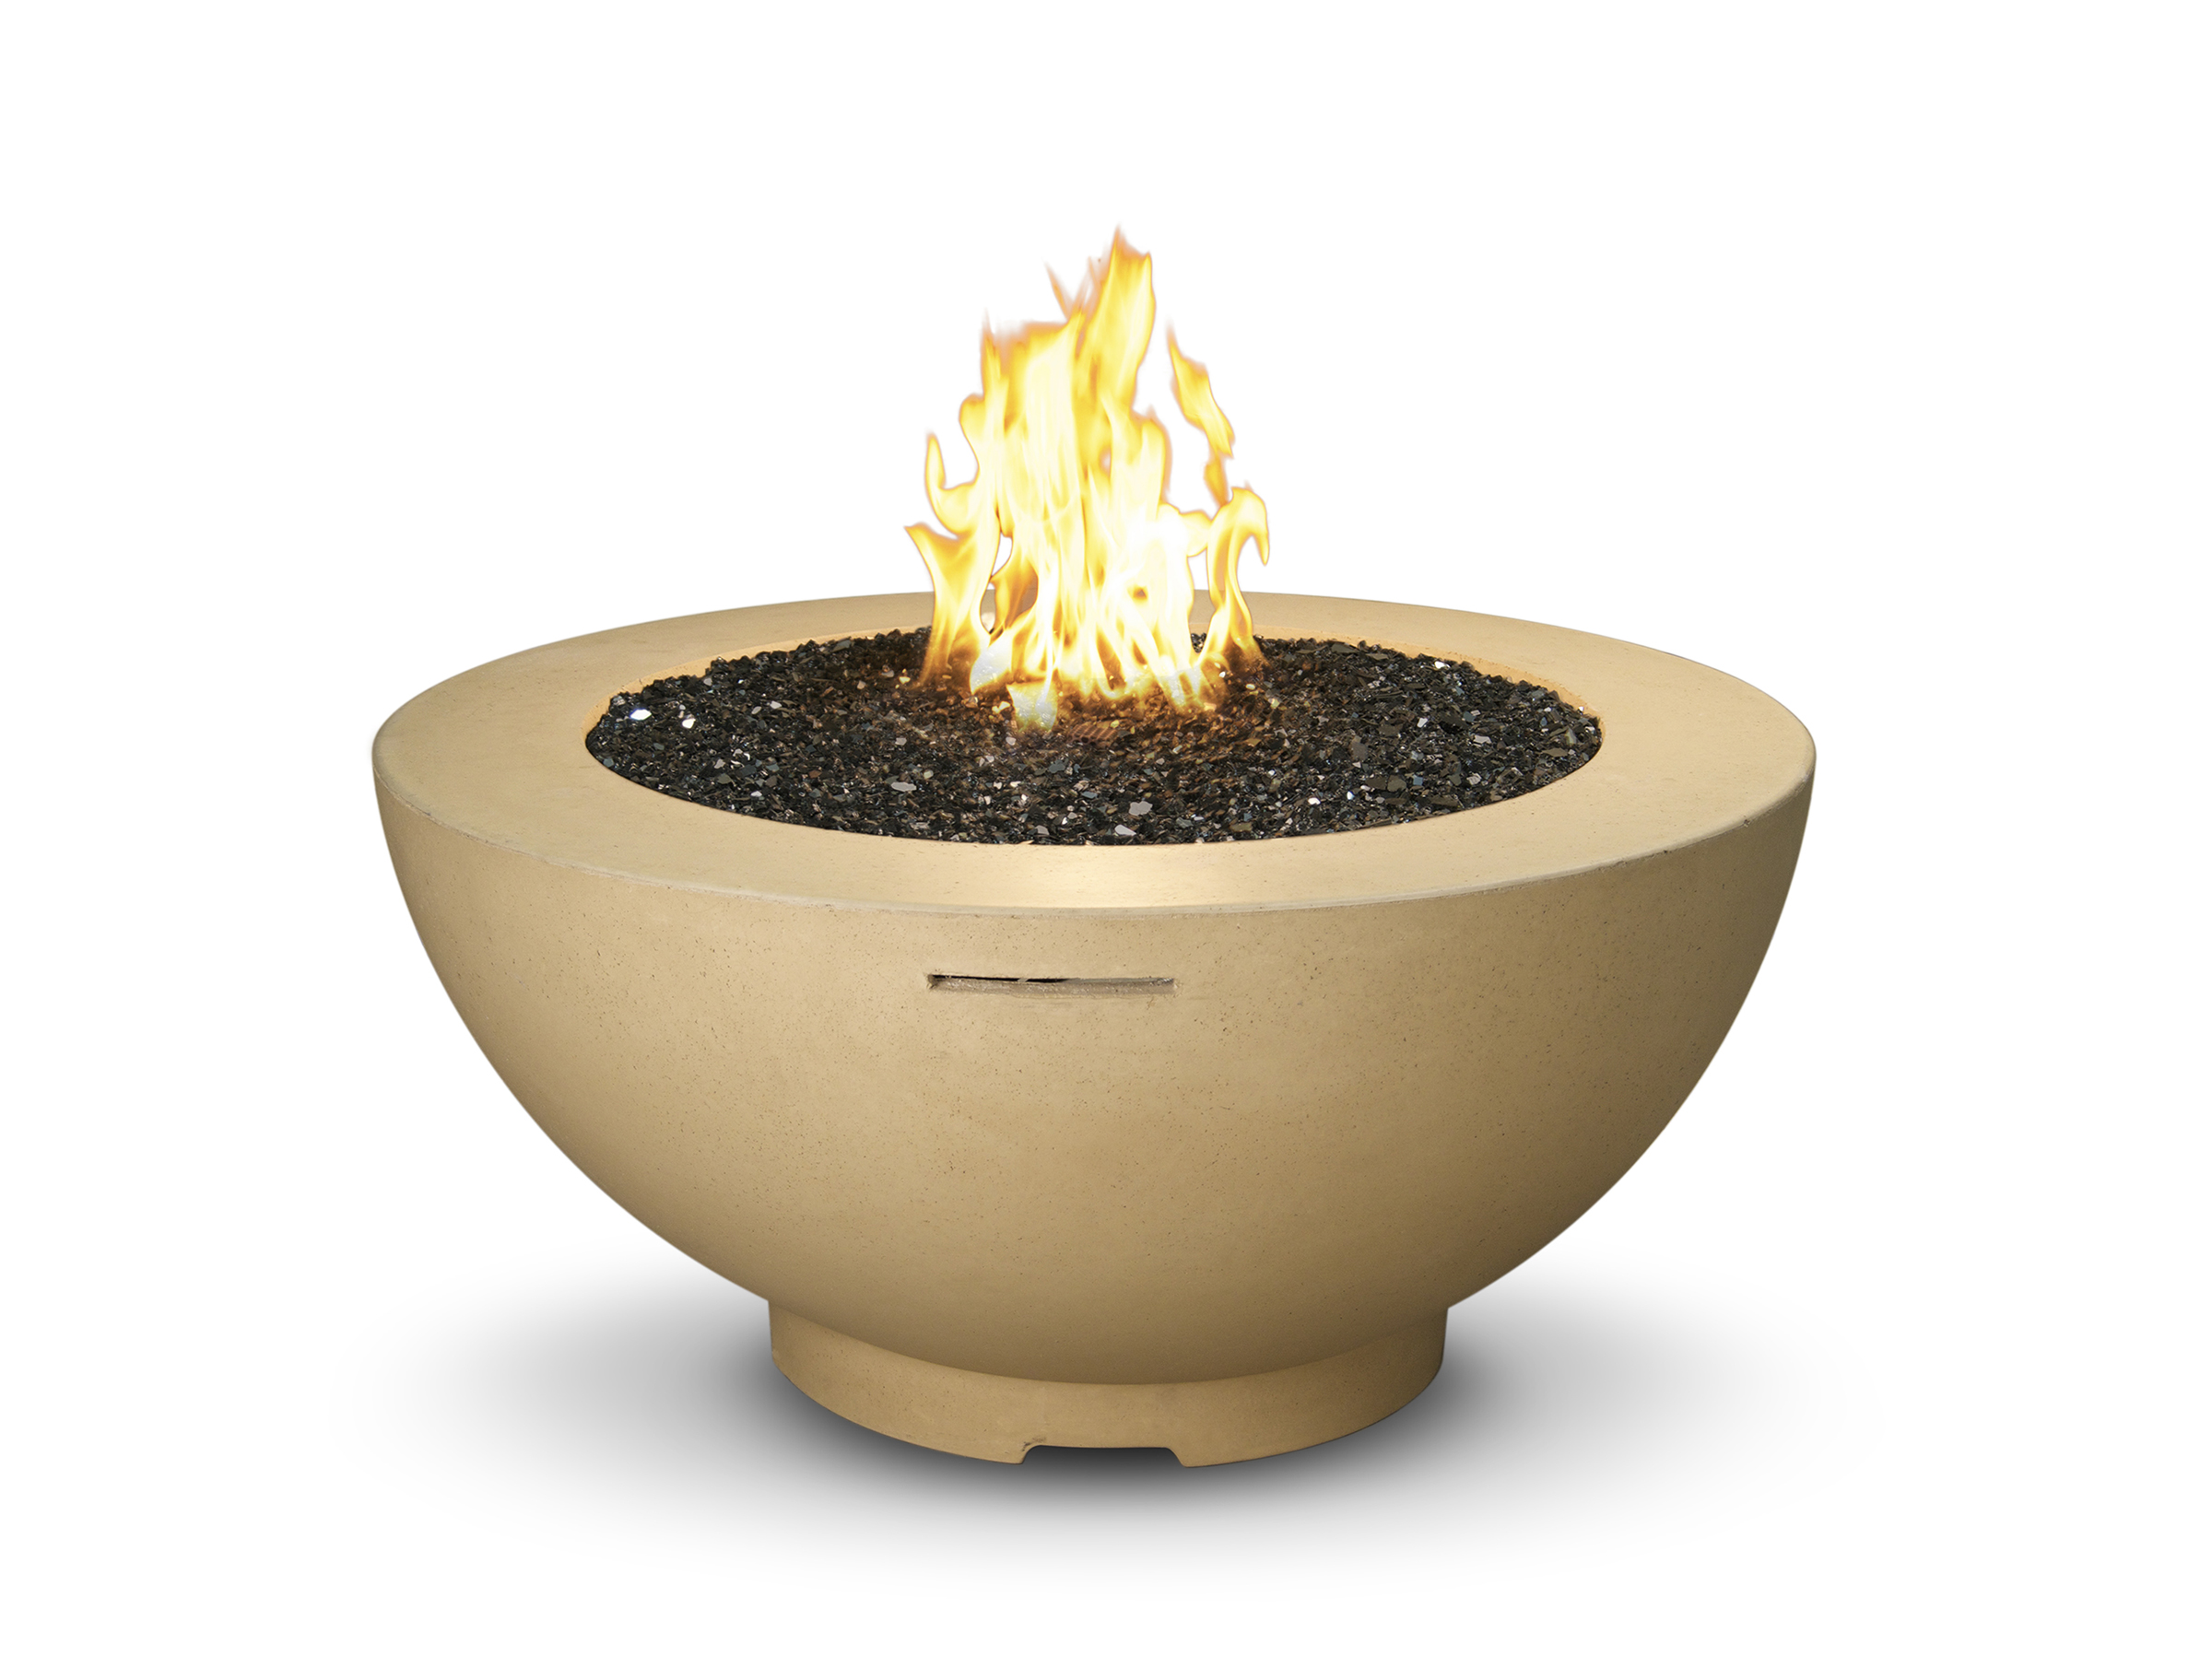 48 inch fire bowl from American Fyre Design made of GFRC